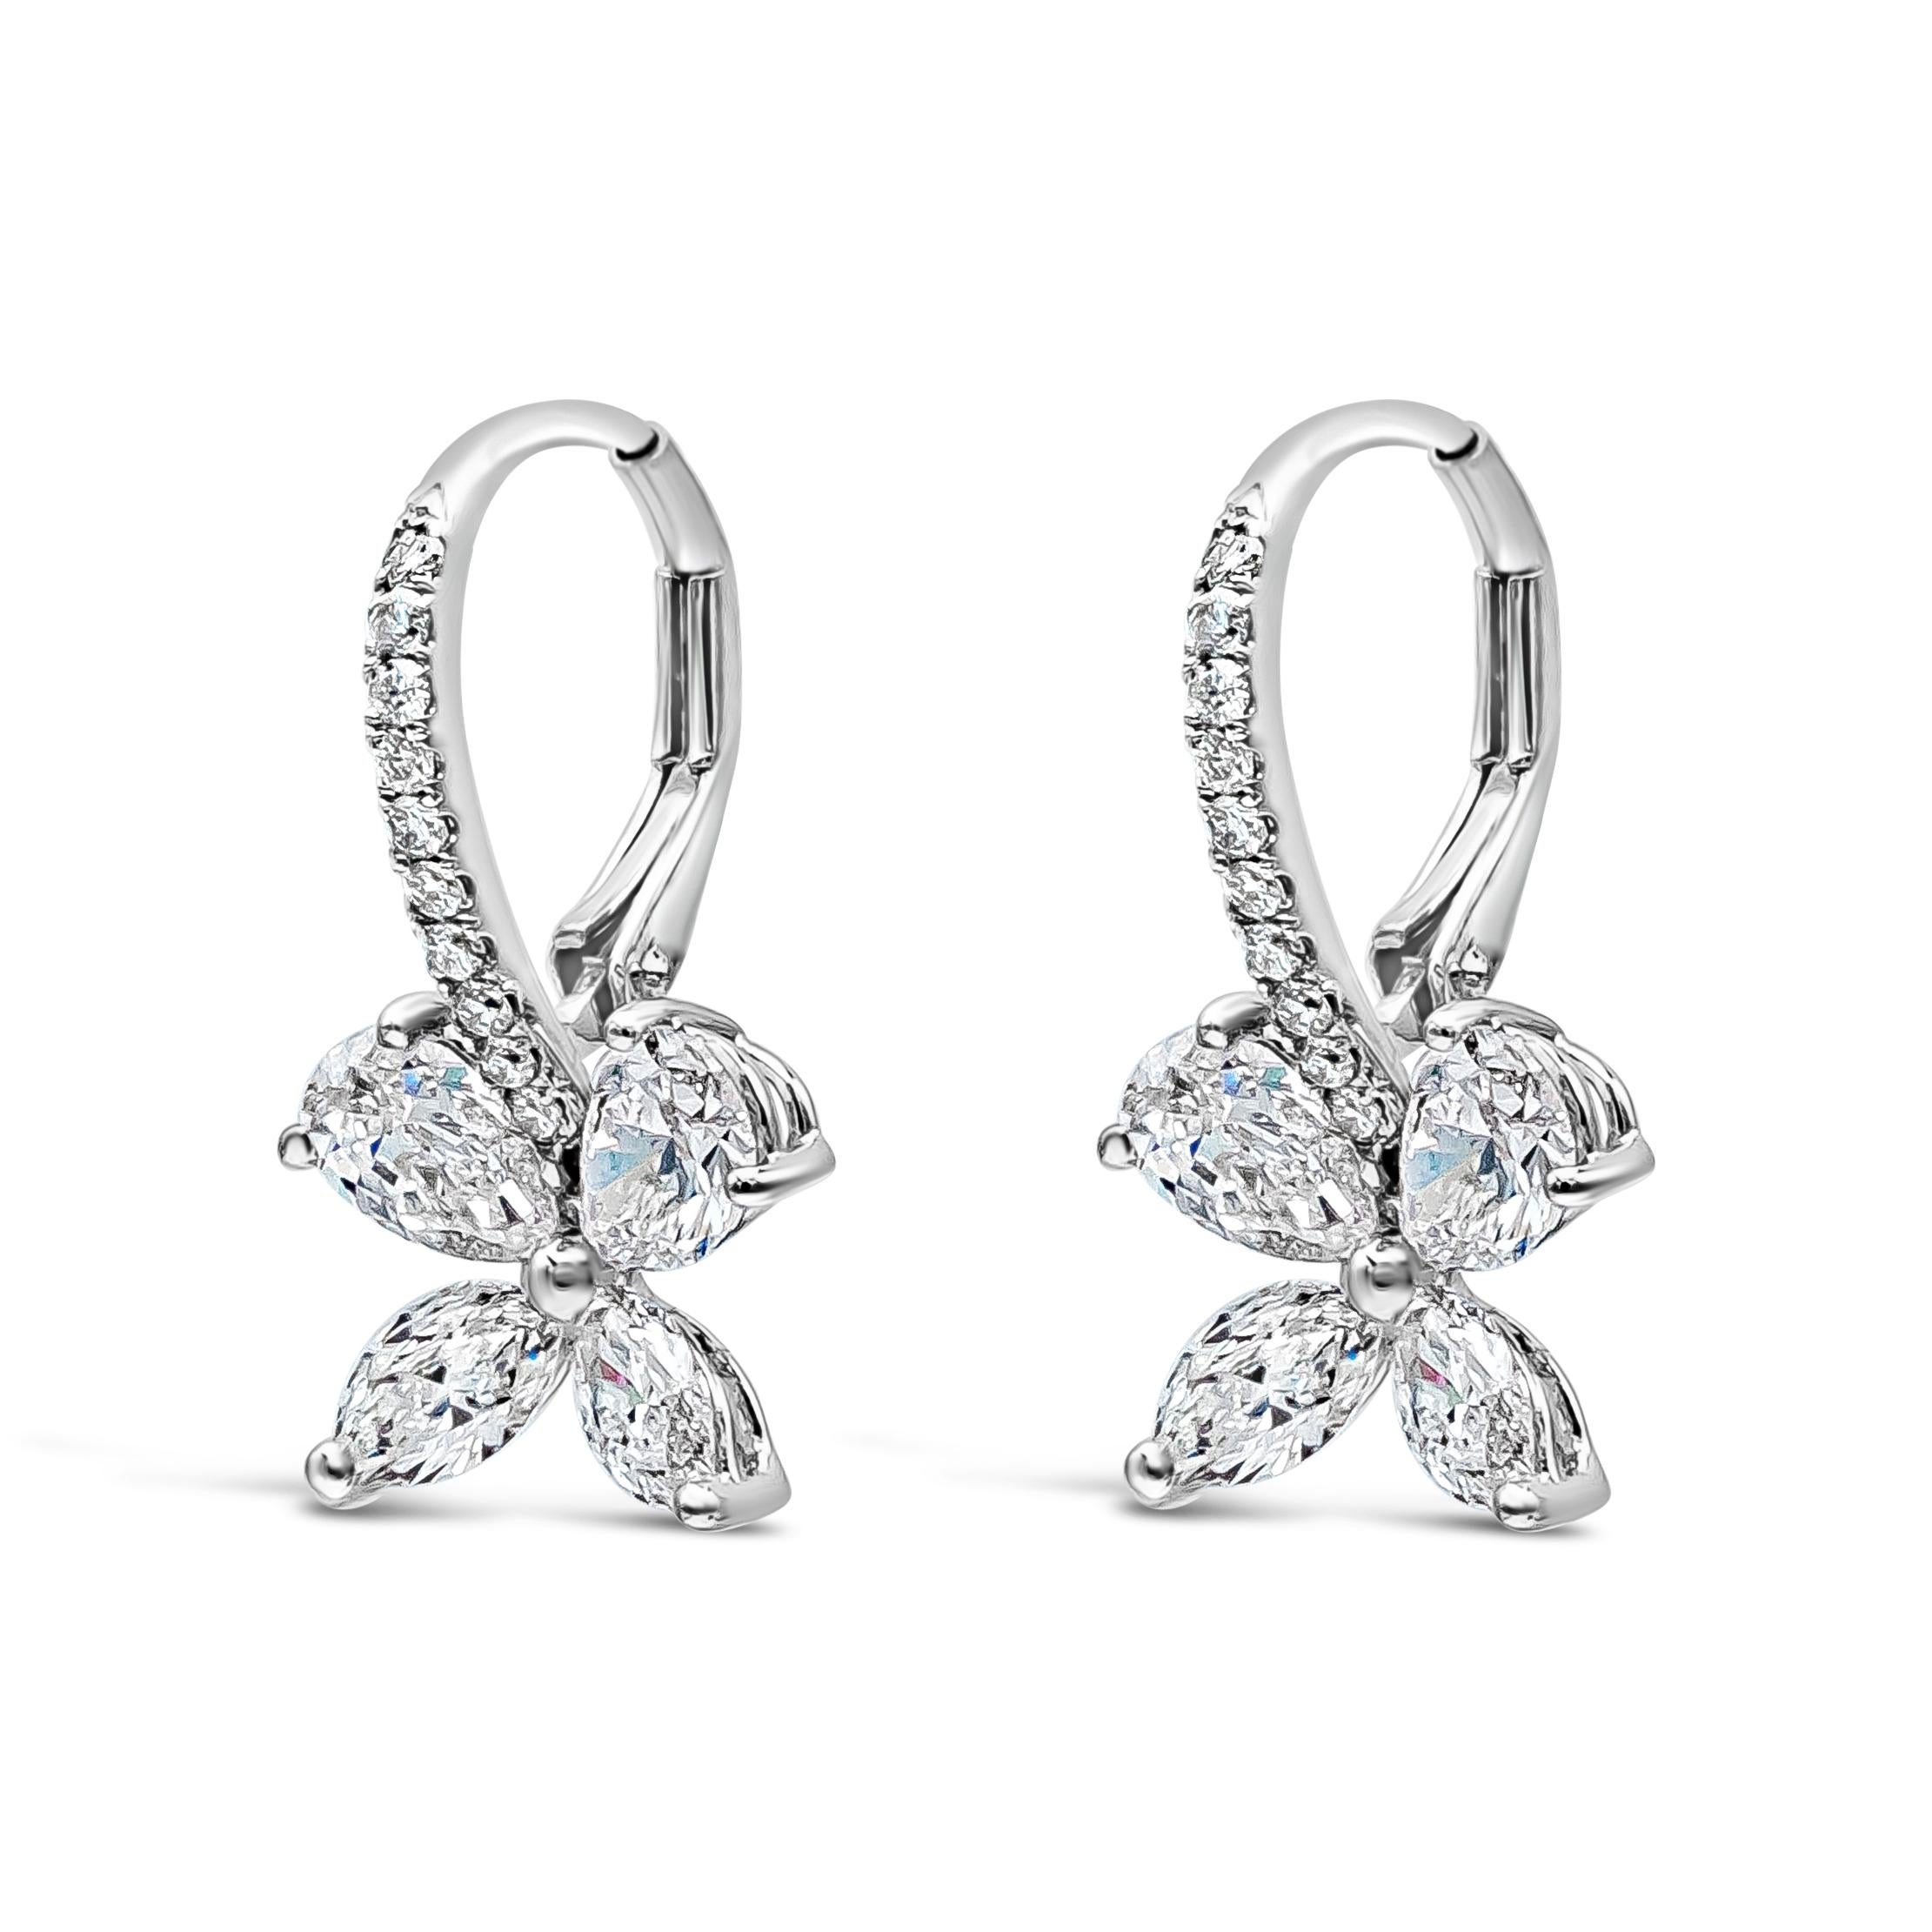 Unique style drop earrings showcasing mixed-shape diamonds weighing 2.06 carats total. Set in an elegant flower setting, Made with 18K White Gold.

Style available in different price ranges. Prices are based on your selection. Please contact us for